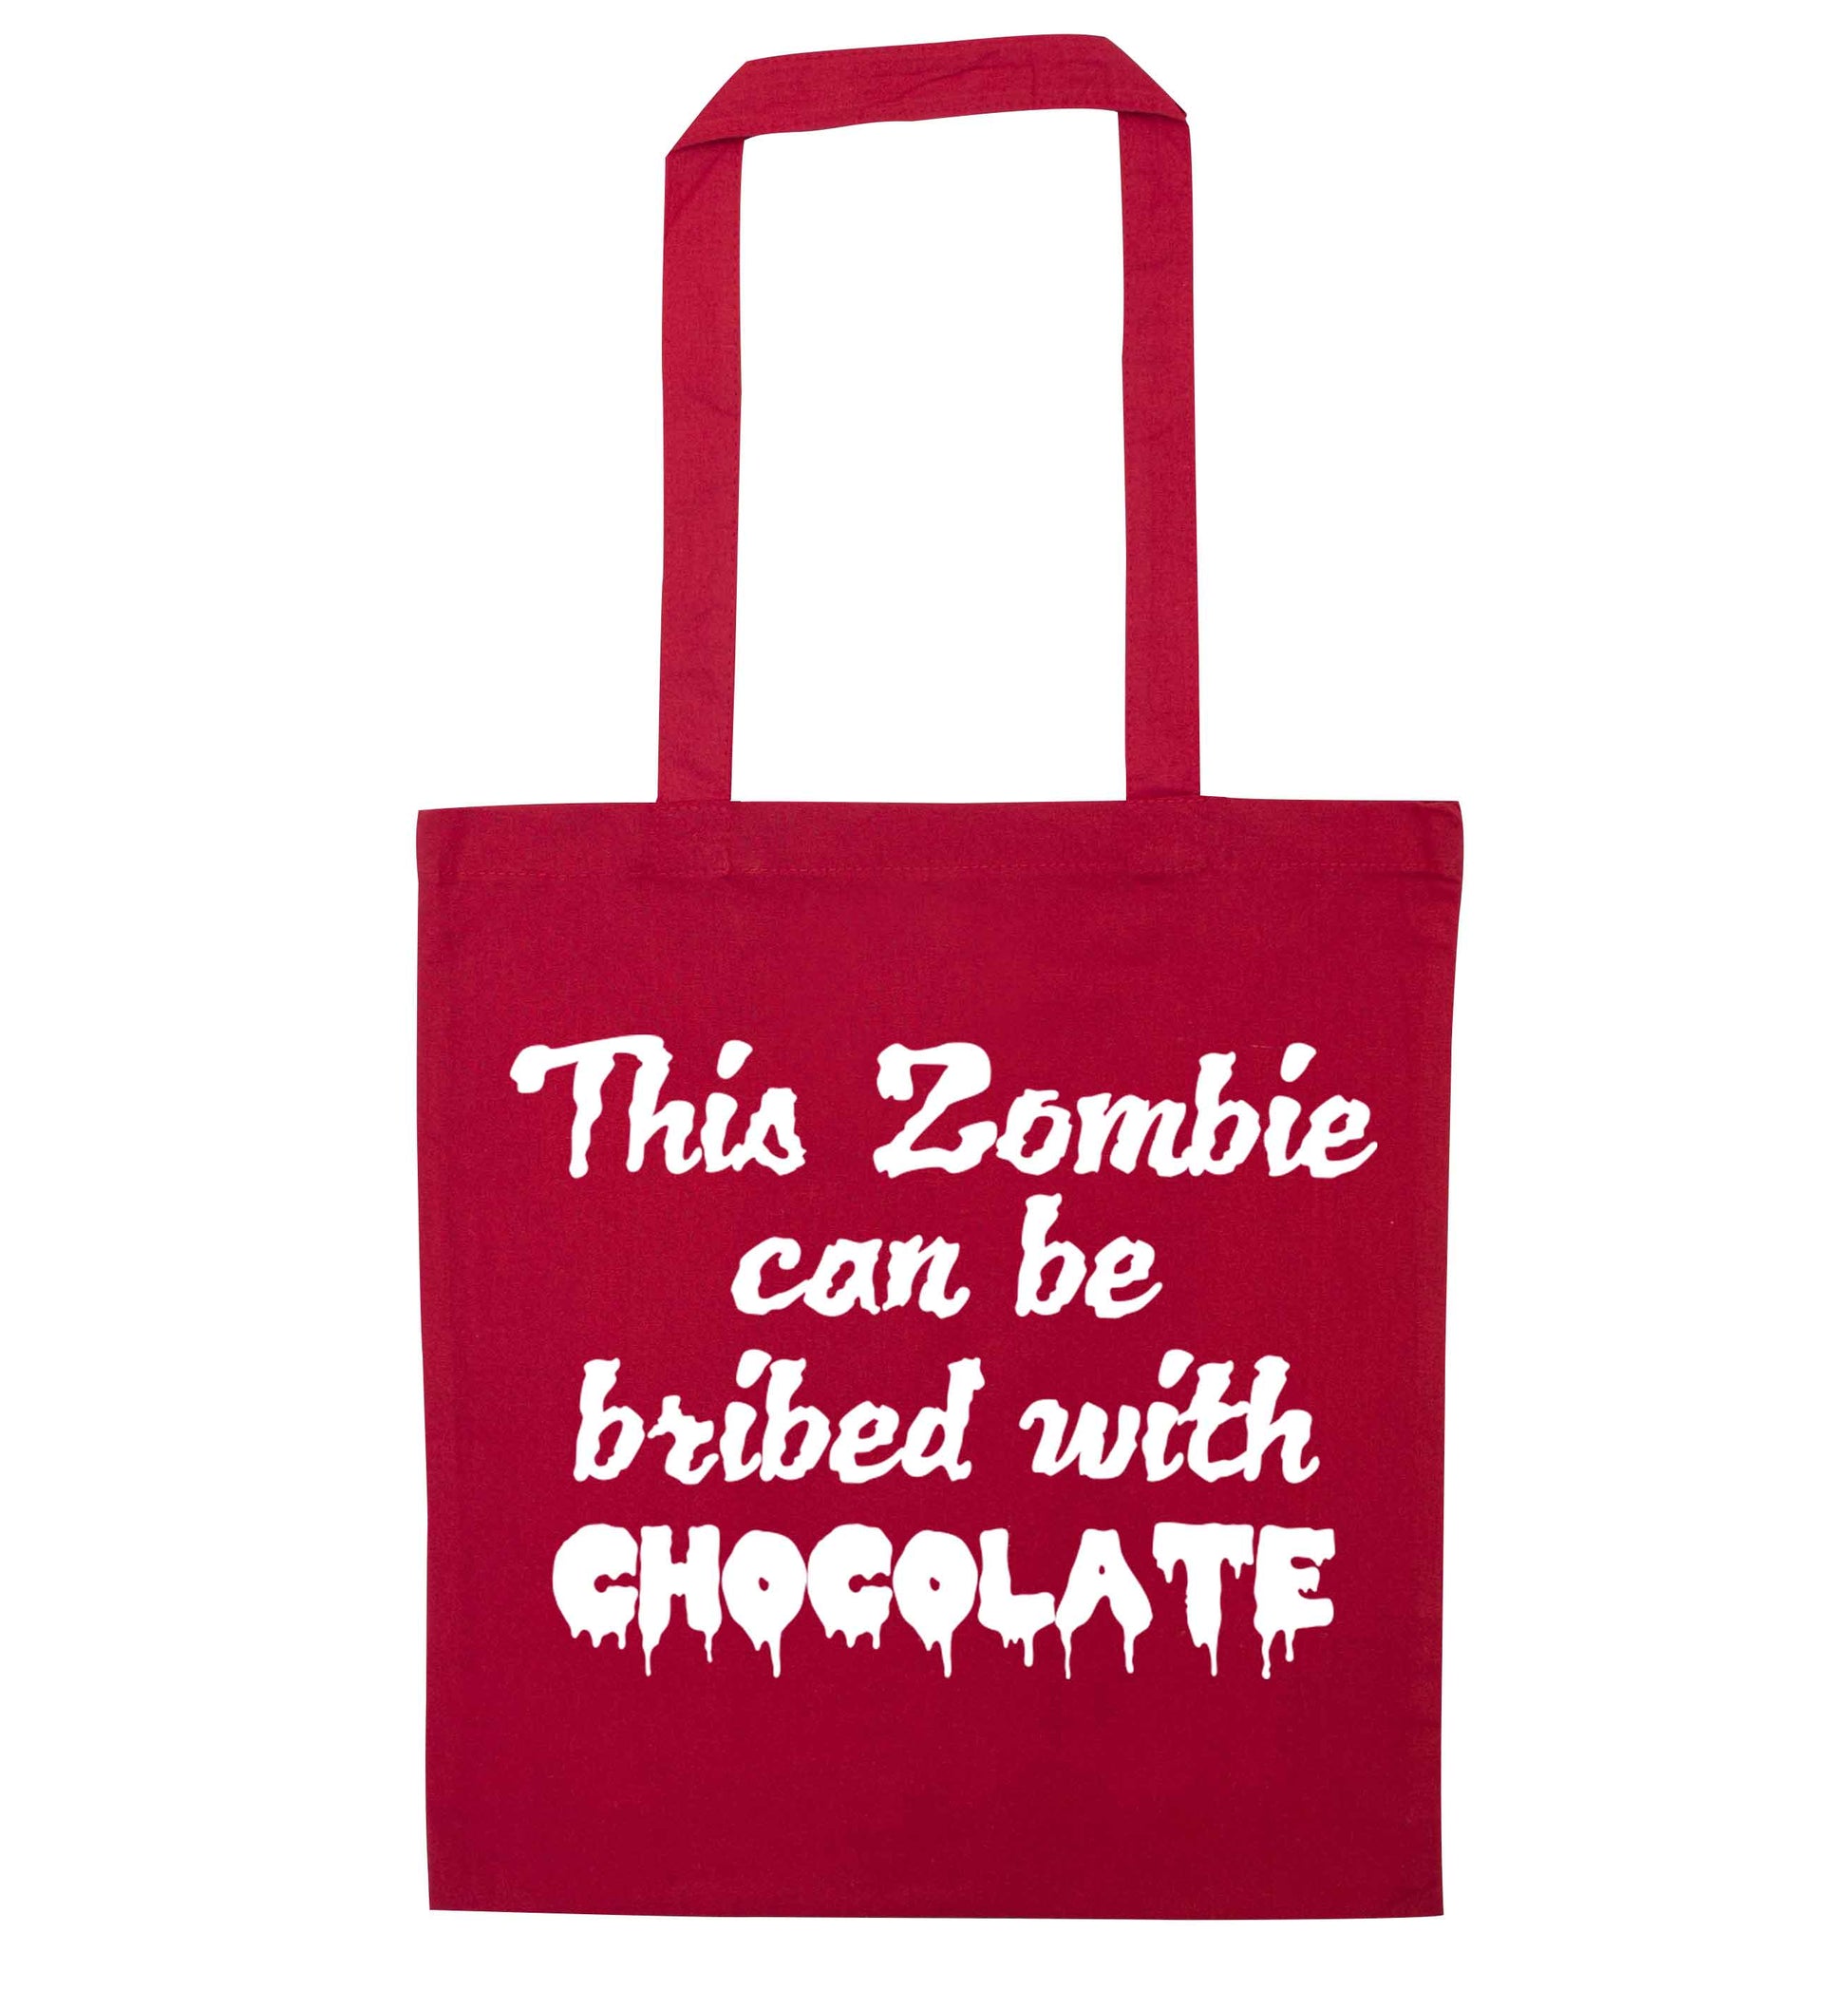 This zombie can be bribed with chocolate red tote bag